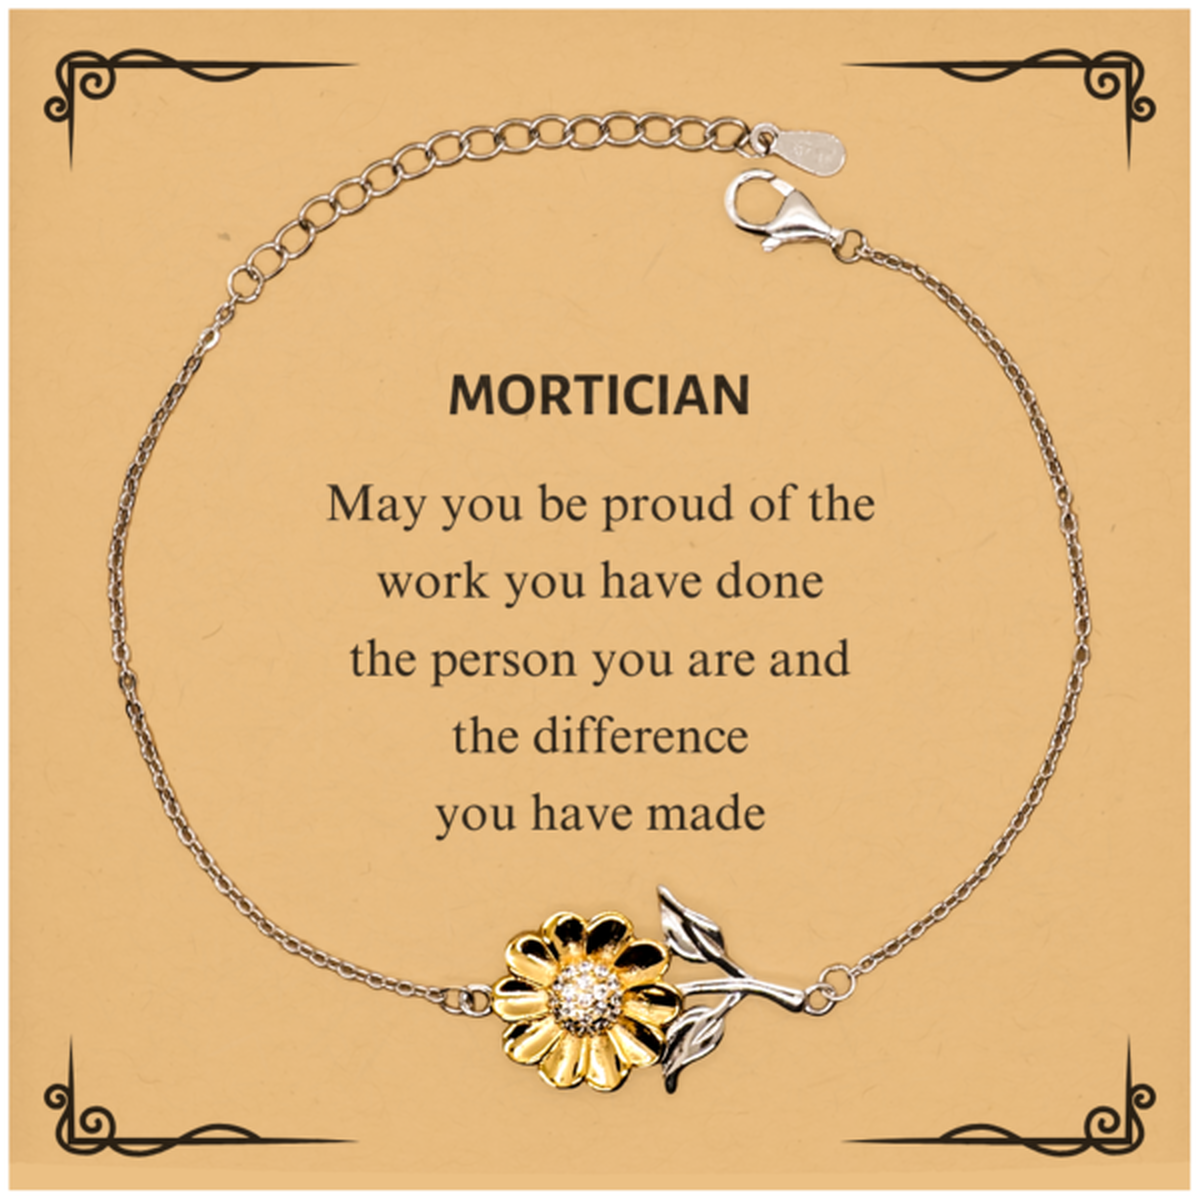 Mortician May you be proud of the work you have done, Retirement Mortician Sunflower Bracelet for Colleague Appreciation Gifts Amazing for Mortician